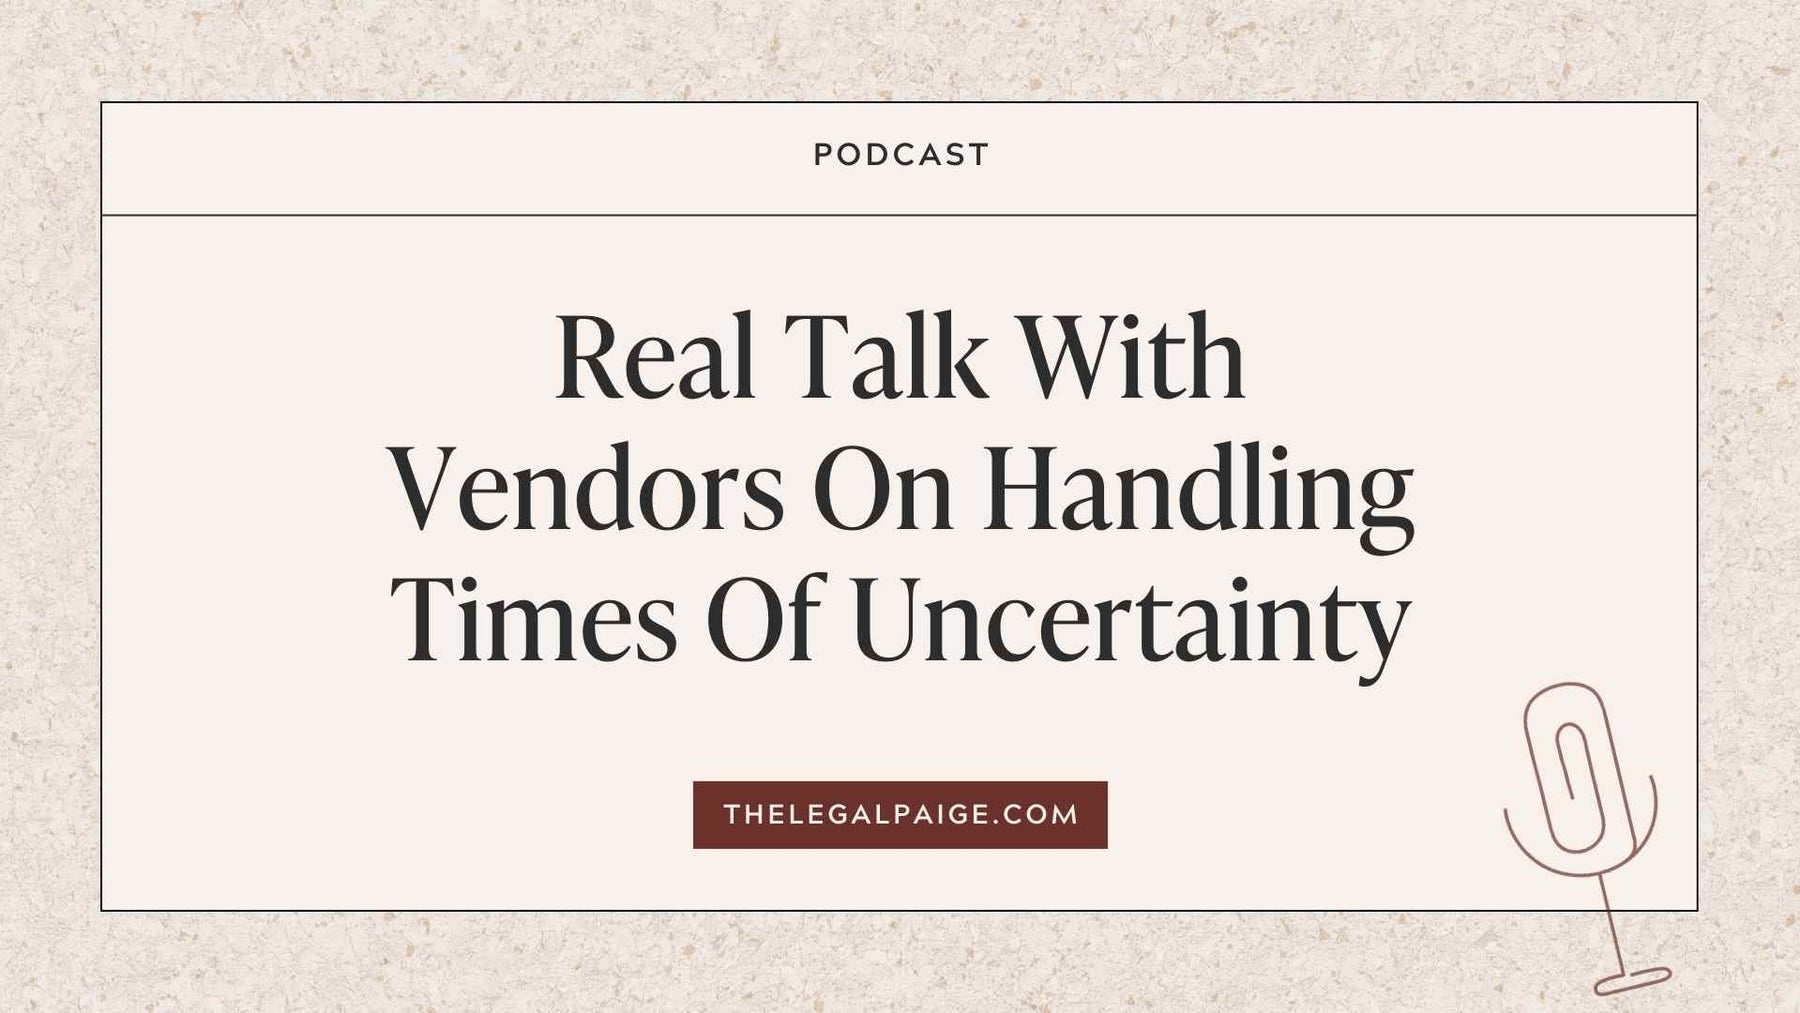 Episode 53: Real Talk With Vendors On Handling Times Of Uncertainty